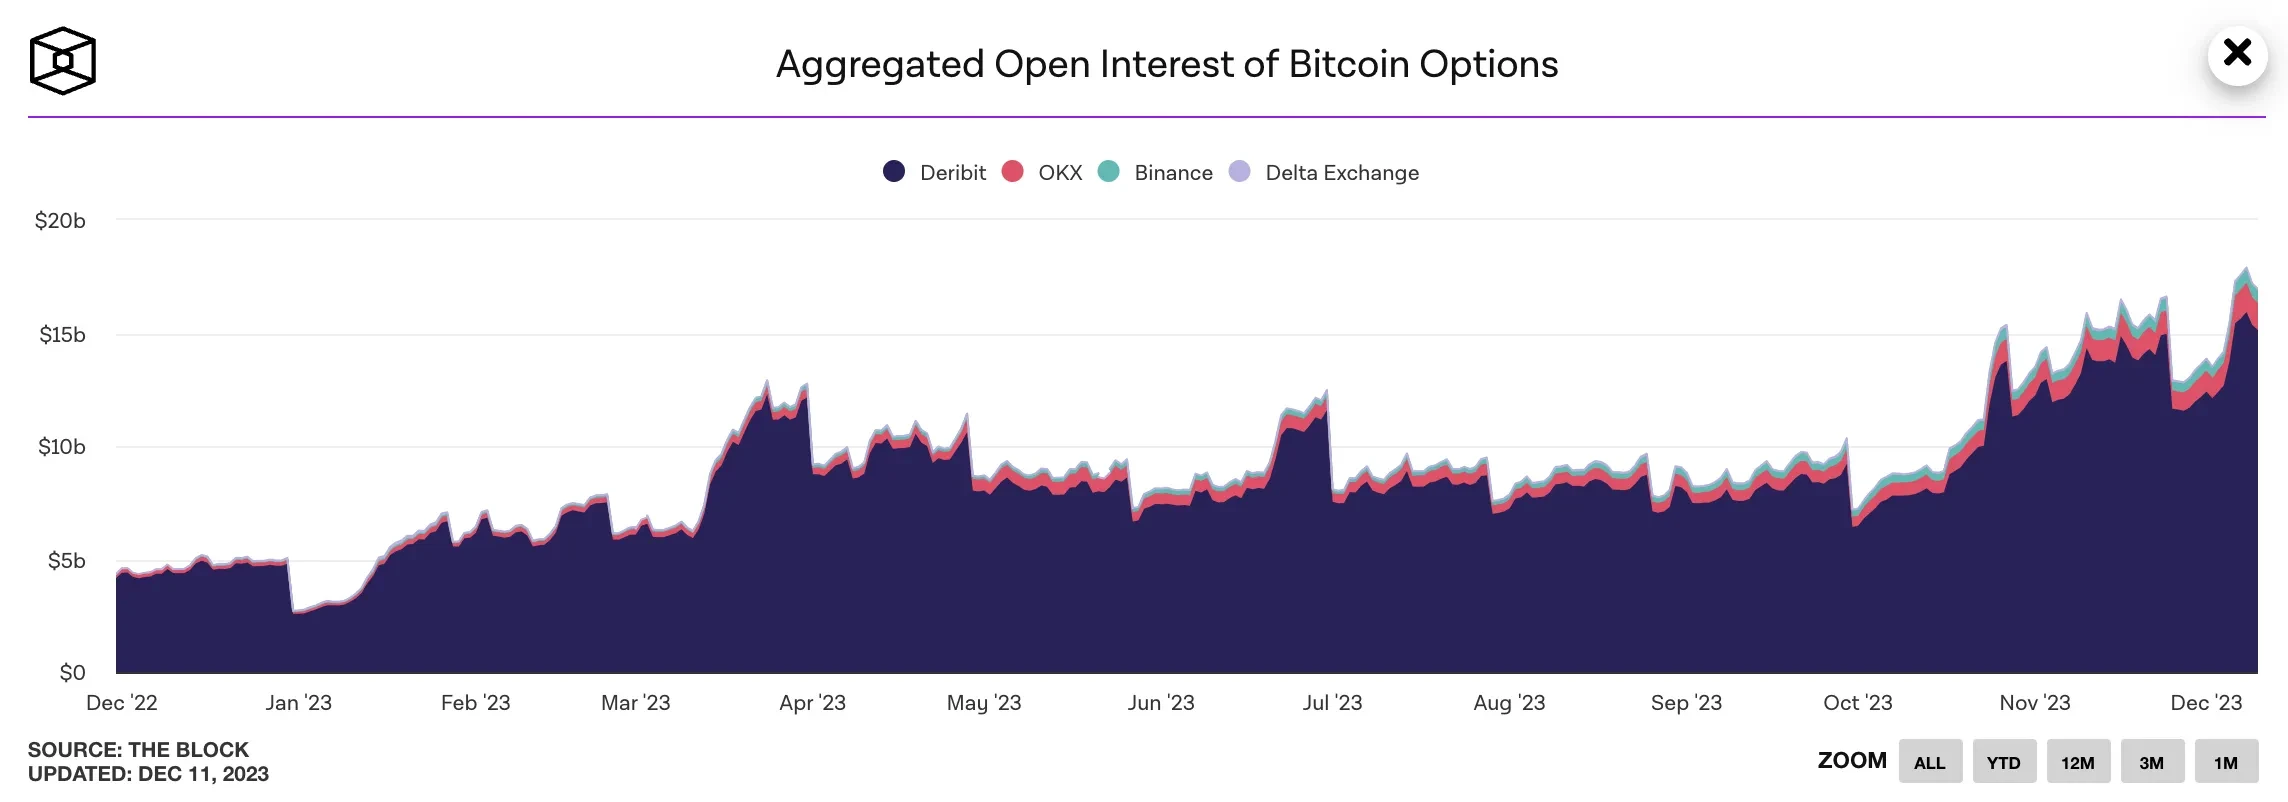 Aggregated open interest BTC options